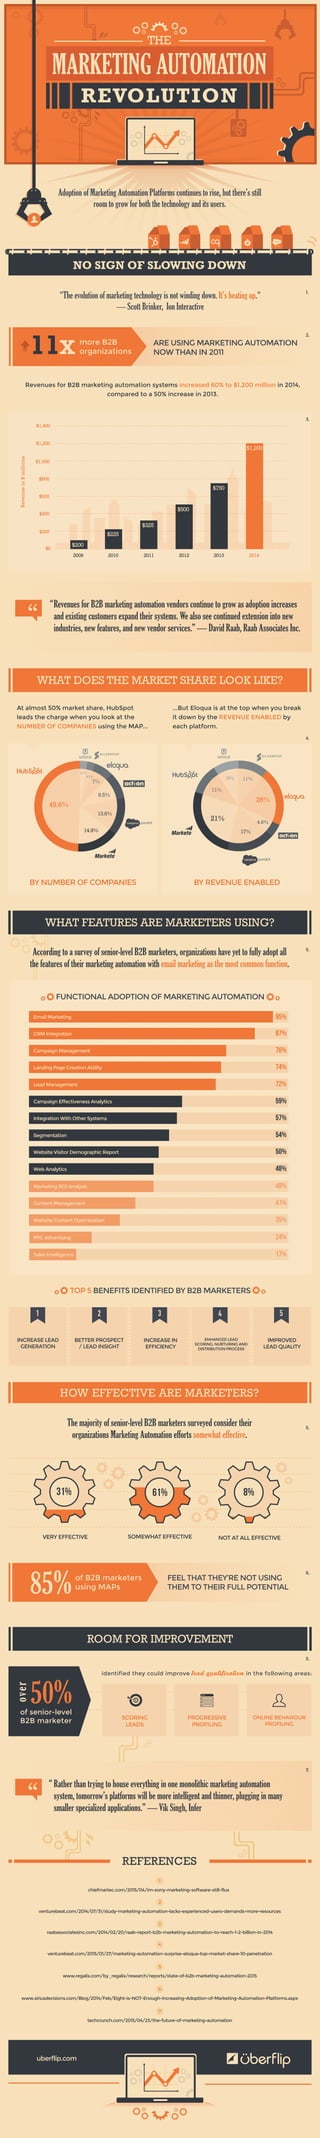 At almost 50% market share, HubSpot
leads the charge when you look at the
NUMBER OF COMPANIES using the MAP...
The majority of senior-level B2B marketers surveyed consider their
organizations Marketing Automation efforts somewhat effective.
...But Eloqua is at the top when you break
it down by the REVENUE ENABLED by
each platform.
FEEL THAT THEY’RE NOT USING
THEM TO THEIR FULL POTENTIAL
of B2B marketers
using MAPs
$0
$200
$200
$225
$325
$500
$750
$1,200
$400
$600
2009 2010 2011 2012 2013 2014
$800
$1,000
$1,200
$1,400
Revenues for B2B marketing automation systems increased 60% to $1,200 million in 2014,
compared to a 50% increase in 2013.
21%
26%
11%
17%
11%9%
4.6%
49.6%
14.9%
13.6%
9.5%
7%
2.7%
2.7%
Adoption of Marketing Automation Platforms continues to rise, but there’s still
room to grow for both the technology and its users.
"The evolution of marketing technology is not winding down. It’s heating up."
— Scott Brinker, Ion Interactive
MARKETING AUTOMATION
REVOLUTION
THE
NO SIGN OF SLOWING DOWN
HOW EFFECTIVE ARE MARKETERS?
WHAT DOES THE MARKET SHARE LOOK LIKE?
ROOM FOR IMPROVEMENT
BY NUMBER OF COMPANIES
SOMEWHAT EFFECTIVE NOT AT ALL EFFECTIVE
BY REVENUE ENABLED
61% 8%
50%of senior-level
B2B marketer
over
PROGRESSIVE
PROFILING
ONLINE BEHAVIOUR
PROFILING
SCORING
LEADS
REFERENCES
INCREASE LEAD
GENERATION
TOP 5 BENEFITS IDENTIFIED BY B2B MARKETERS
According to a survey of senior-level B2B marketers, organizations have yet to fully adopt all
the features of their marketing automation with email marketing as the most common function.
FUNCTIONAL ADOPTION OF MARKETING AUTOMATION
WHAT FEATURES ARE MARKETERS USING?
Email Marketing 95%
CRM Integration 87%
Campaign Management 76%
Landing Page Creation Ability 74%
Lead Management 72%
Campaign Effectiveness Analytics 59%
Integration With Other Systems 57%
Segmentation 54%
Website Visitor Demographic Report 50%
Web Analytics 48%
Marketing ROI Analysis 48%
Content Management 41%
Website Content Optimization 35%
PPC Advertising 24%
Sales Intelligence 17%
1 2
BETTER PROSPECT
/ LEAD INSIGHT
INCREASE IN
EFFICIENCY
ENHANCED LEAD
SCORING, NURTURING AND
DISTRIBUTION PROCESS
IMPROVED
LEAD QUALITY
3 4 5
2.
1.
3.
5.
6.
5.
4.
5.
7.
venturebeat.com/2014/07/31/study-marketing-automation-lacks-experienced-users-demands-more-resources
2
raabassociatesinc.com/2014/02/20/raab-report-b2b-marketing-automation-to-reach-1-2-billion-in-2014
3
venturebeat.com/2015/01/27/marketing-automation-surprise-eloqua-top-market-share-10-penetration
4
uberflip.com
VERY EFFECTIVE
31%
Revenues for B2B marketing automation vendors continue to grow as adoption increases
and existing customers expand their systems. We also see continued extension into new
industries, new features, and new vendor services.” — David Raab, Raab Associates Inc.
Rather than trying to house everything in one monolithic marketing automation
system, tomorrow’s platforms will be more intelligent and thinner, plugging in many
smaller specialized applications.” — Vik Singh, Infer
identified they could improve lead qualification in the following areas:
85%
ARE USING MARKETING AUTOMATION
NOW THAN IN 2011
more B2B
organizations11X
www.regalix.com/by_regalix/research/reports/state-of-b2b-marketing-automation-2015
5
“
“
www.siriusdecisions.com/Blog/2014/Feb/Eight-is-NOT-Enough-Increasing-Adoption-of-Marketing-Automation-Platforms.aspx
6
techcrunch.com/2015/04/23/the-future-of-marketing-automation
7
Revenuein$millions
chiefmartec.com/2015/04/im-sorry-marketing-software-still-flux
1
 